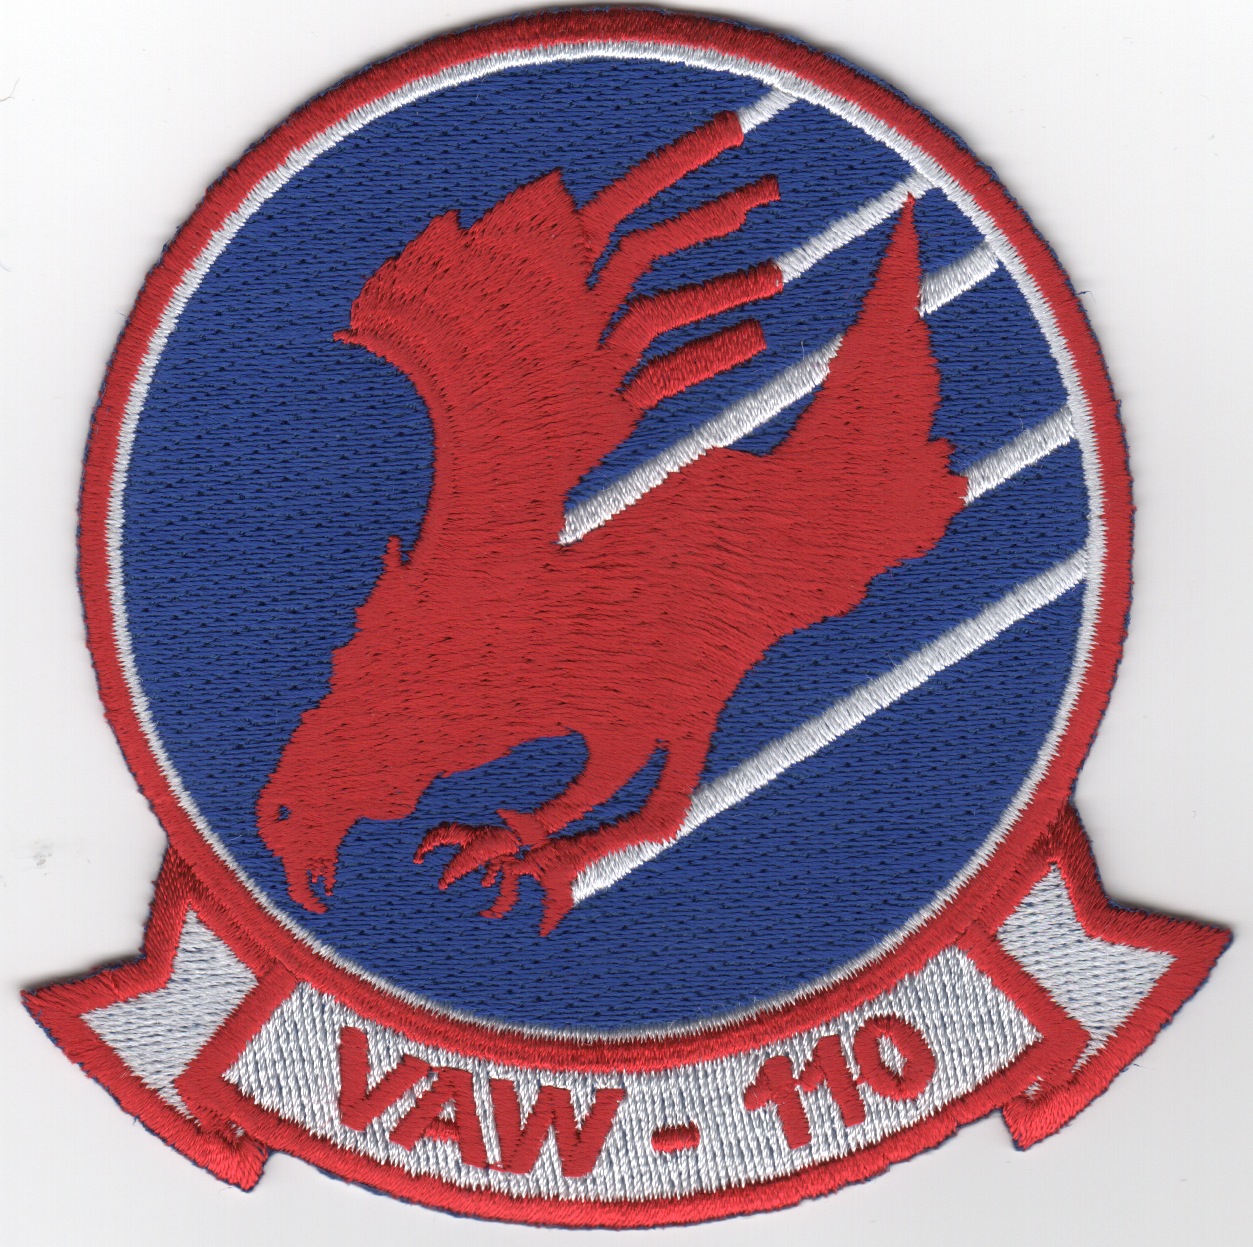 VAW-110 Squadron Patch